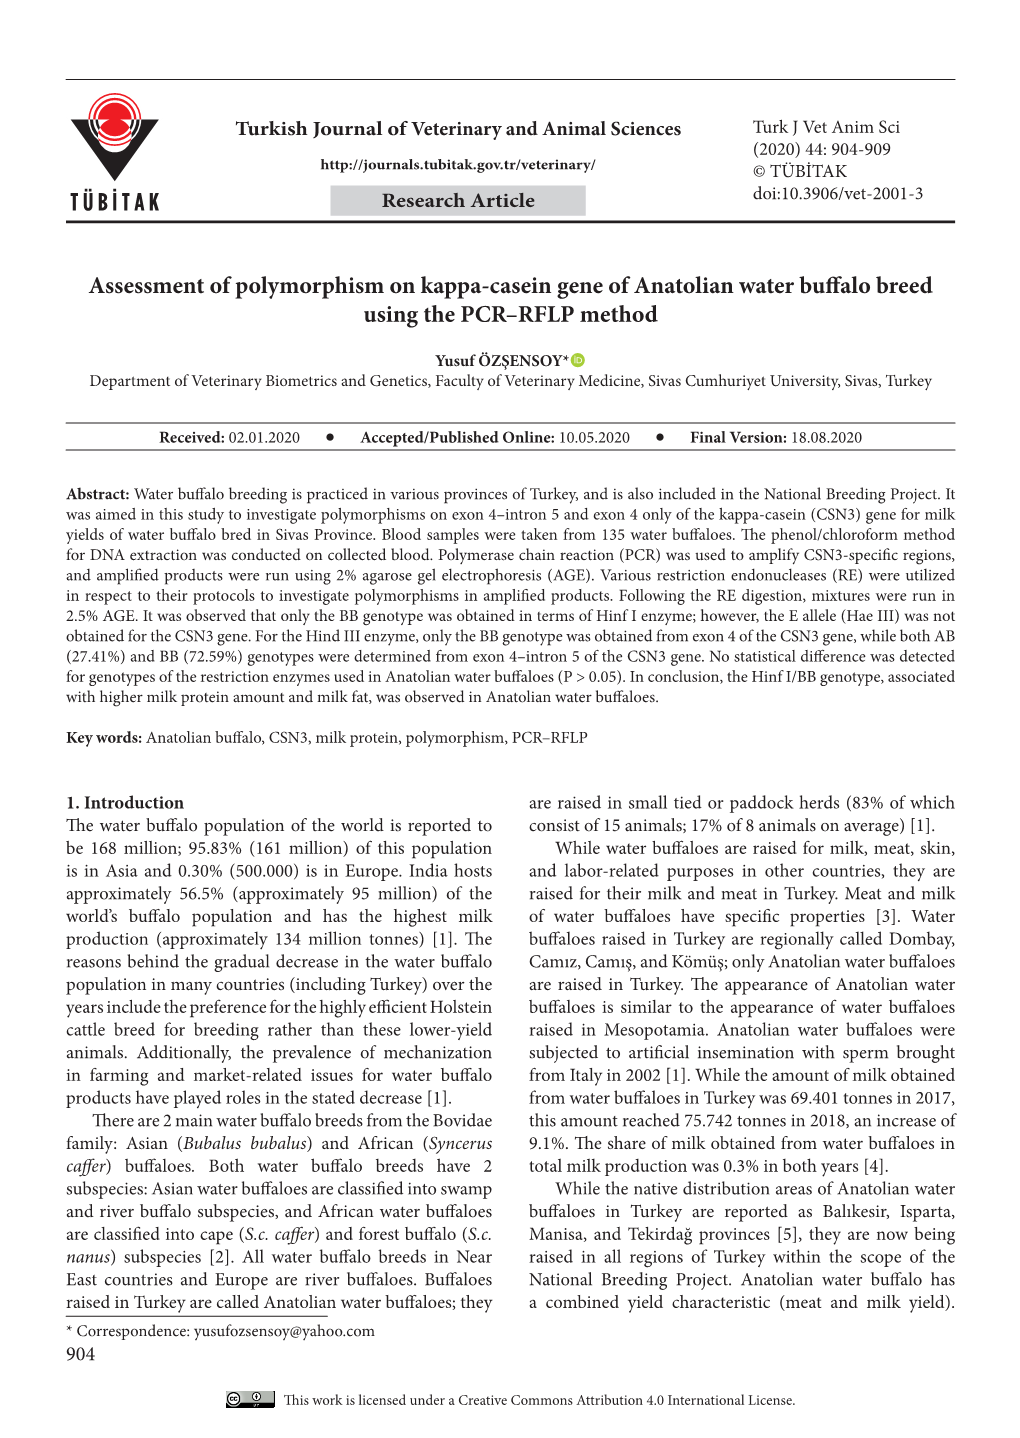 Assessment of Polymorphism on Kappa-Casein Gene of Anatolian Water Buffalo Breed Using the PCR–RFLP Method